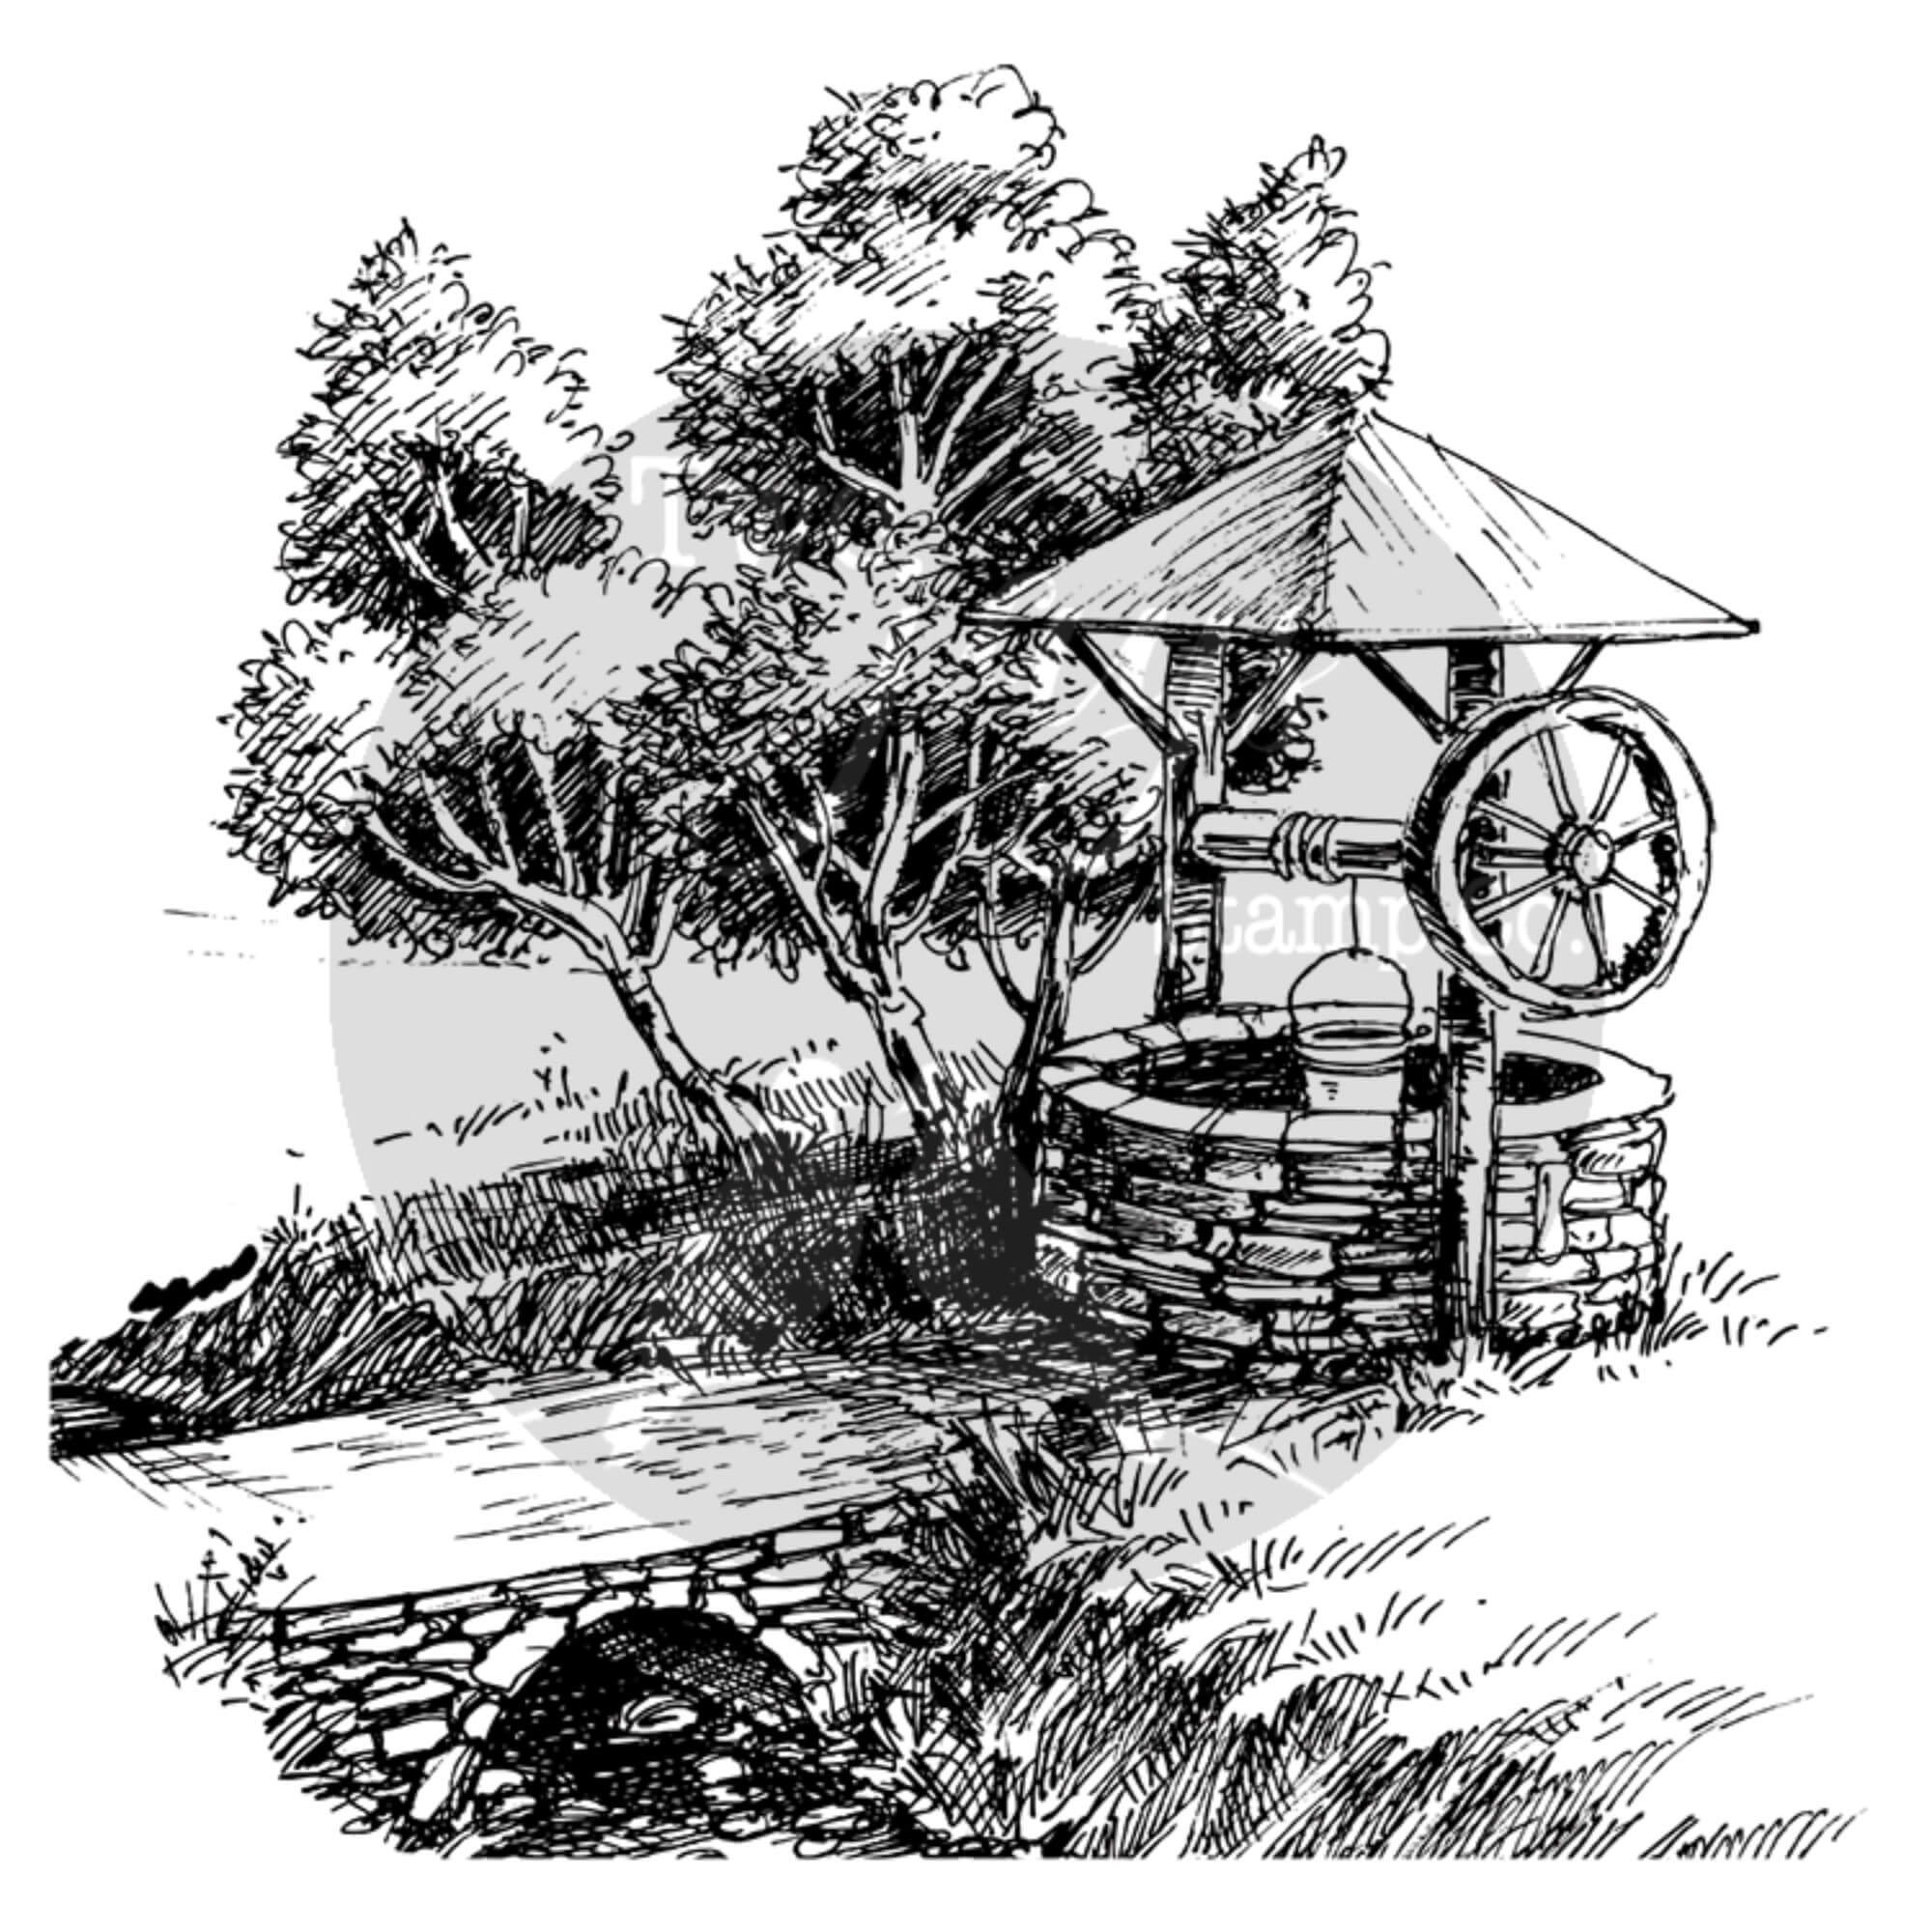 A wishing well marks a part of Bellevue's history | The Seattle Times